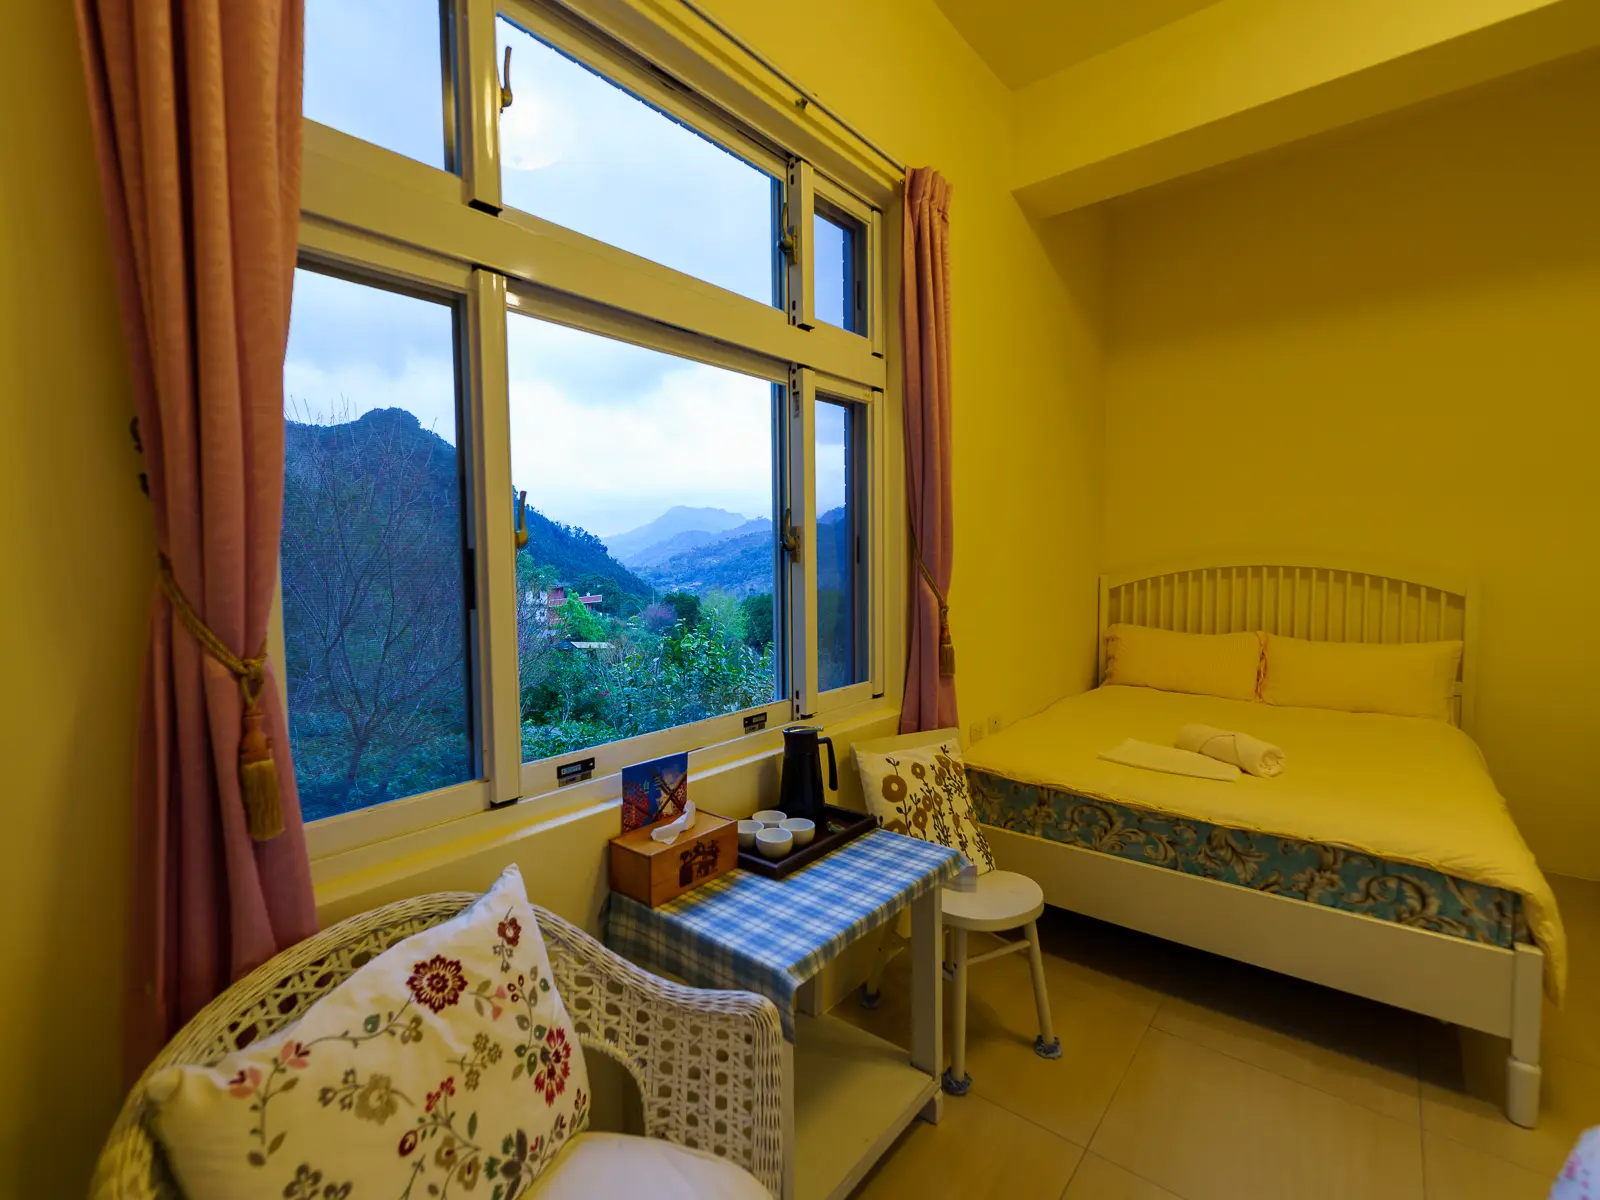 The interior view of a simple guest room with a mountain view.